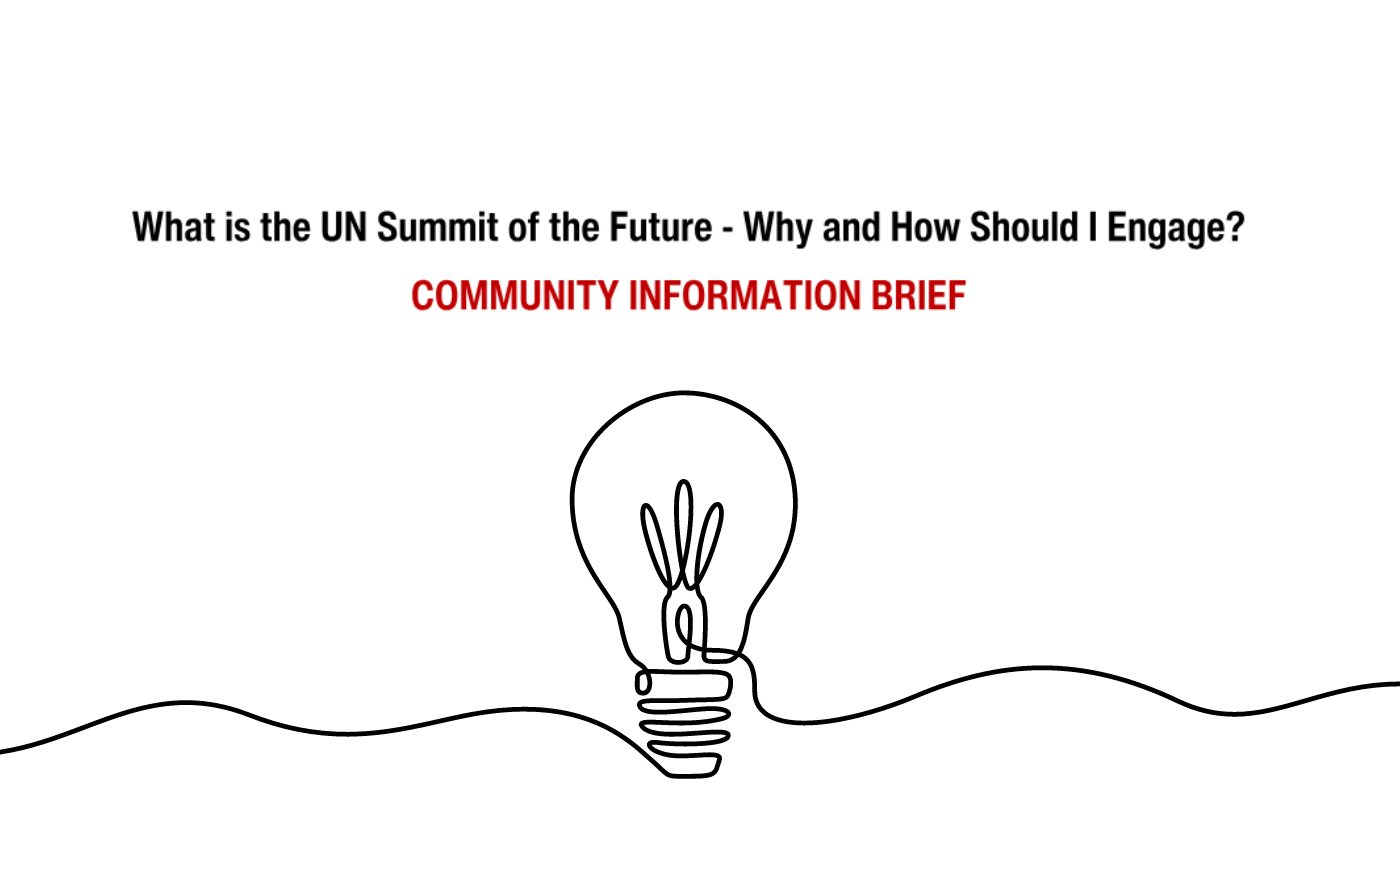 What is the UN Summit of the Future? Community Information Brief